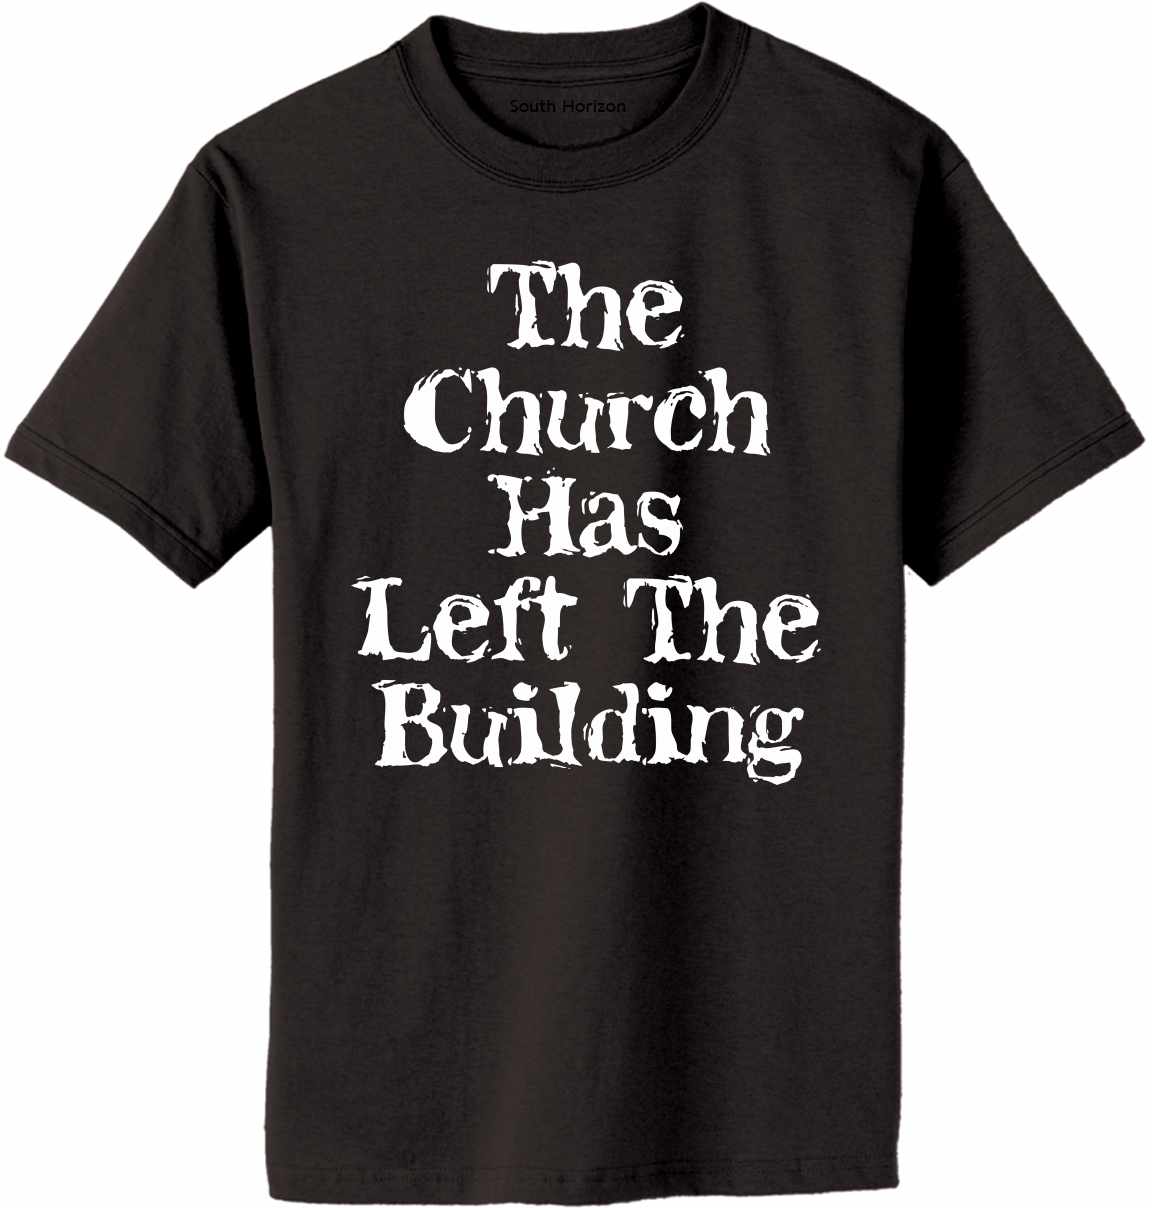 The Church Has Left The Building Adult T-Shirt